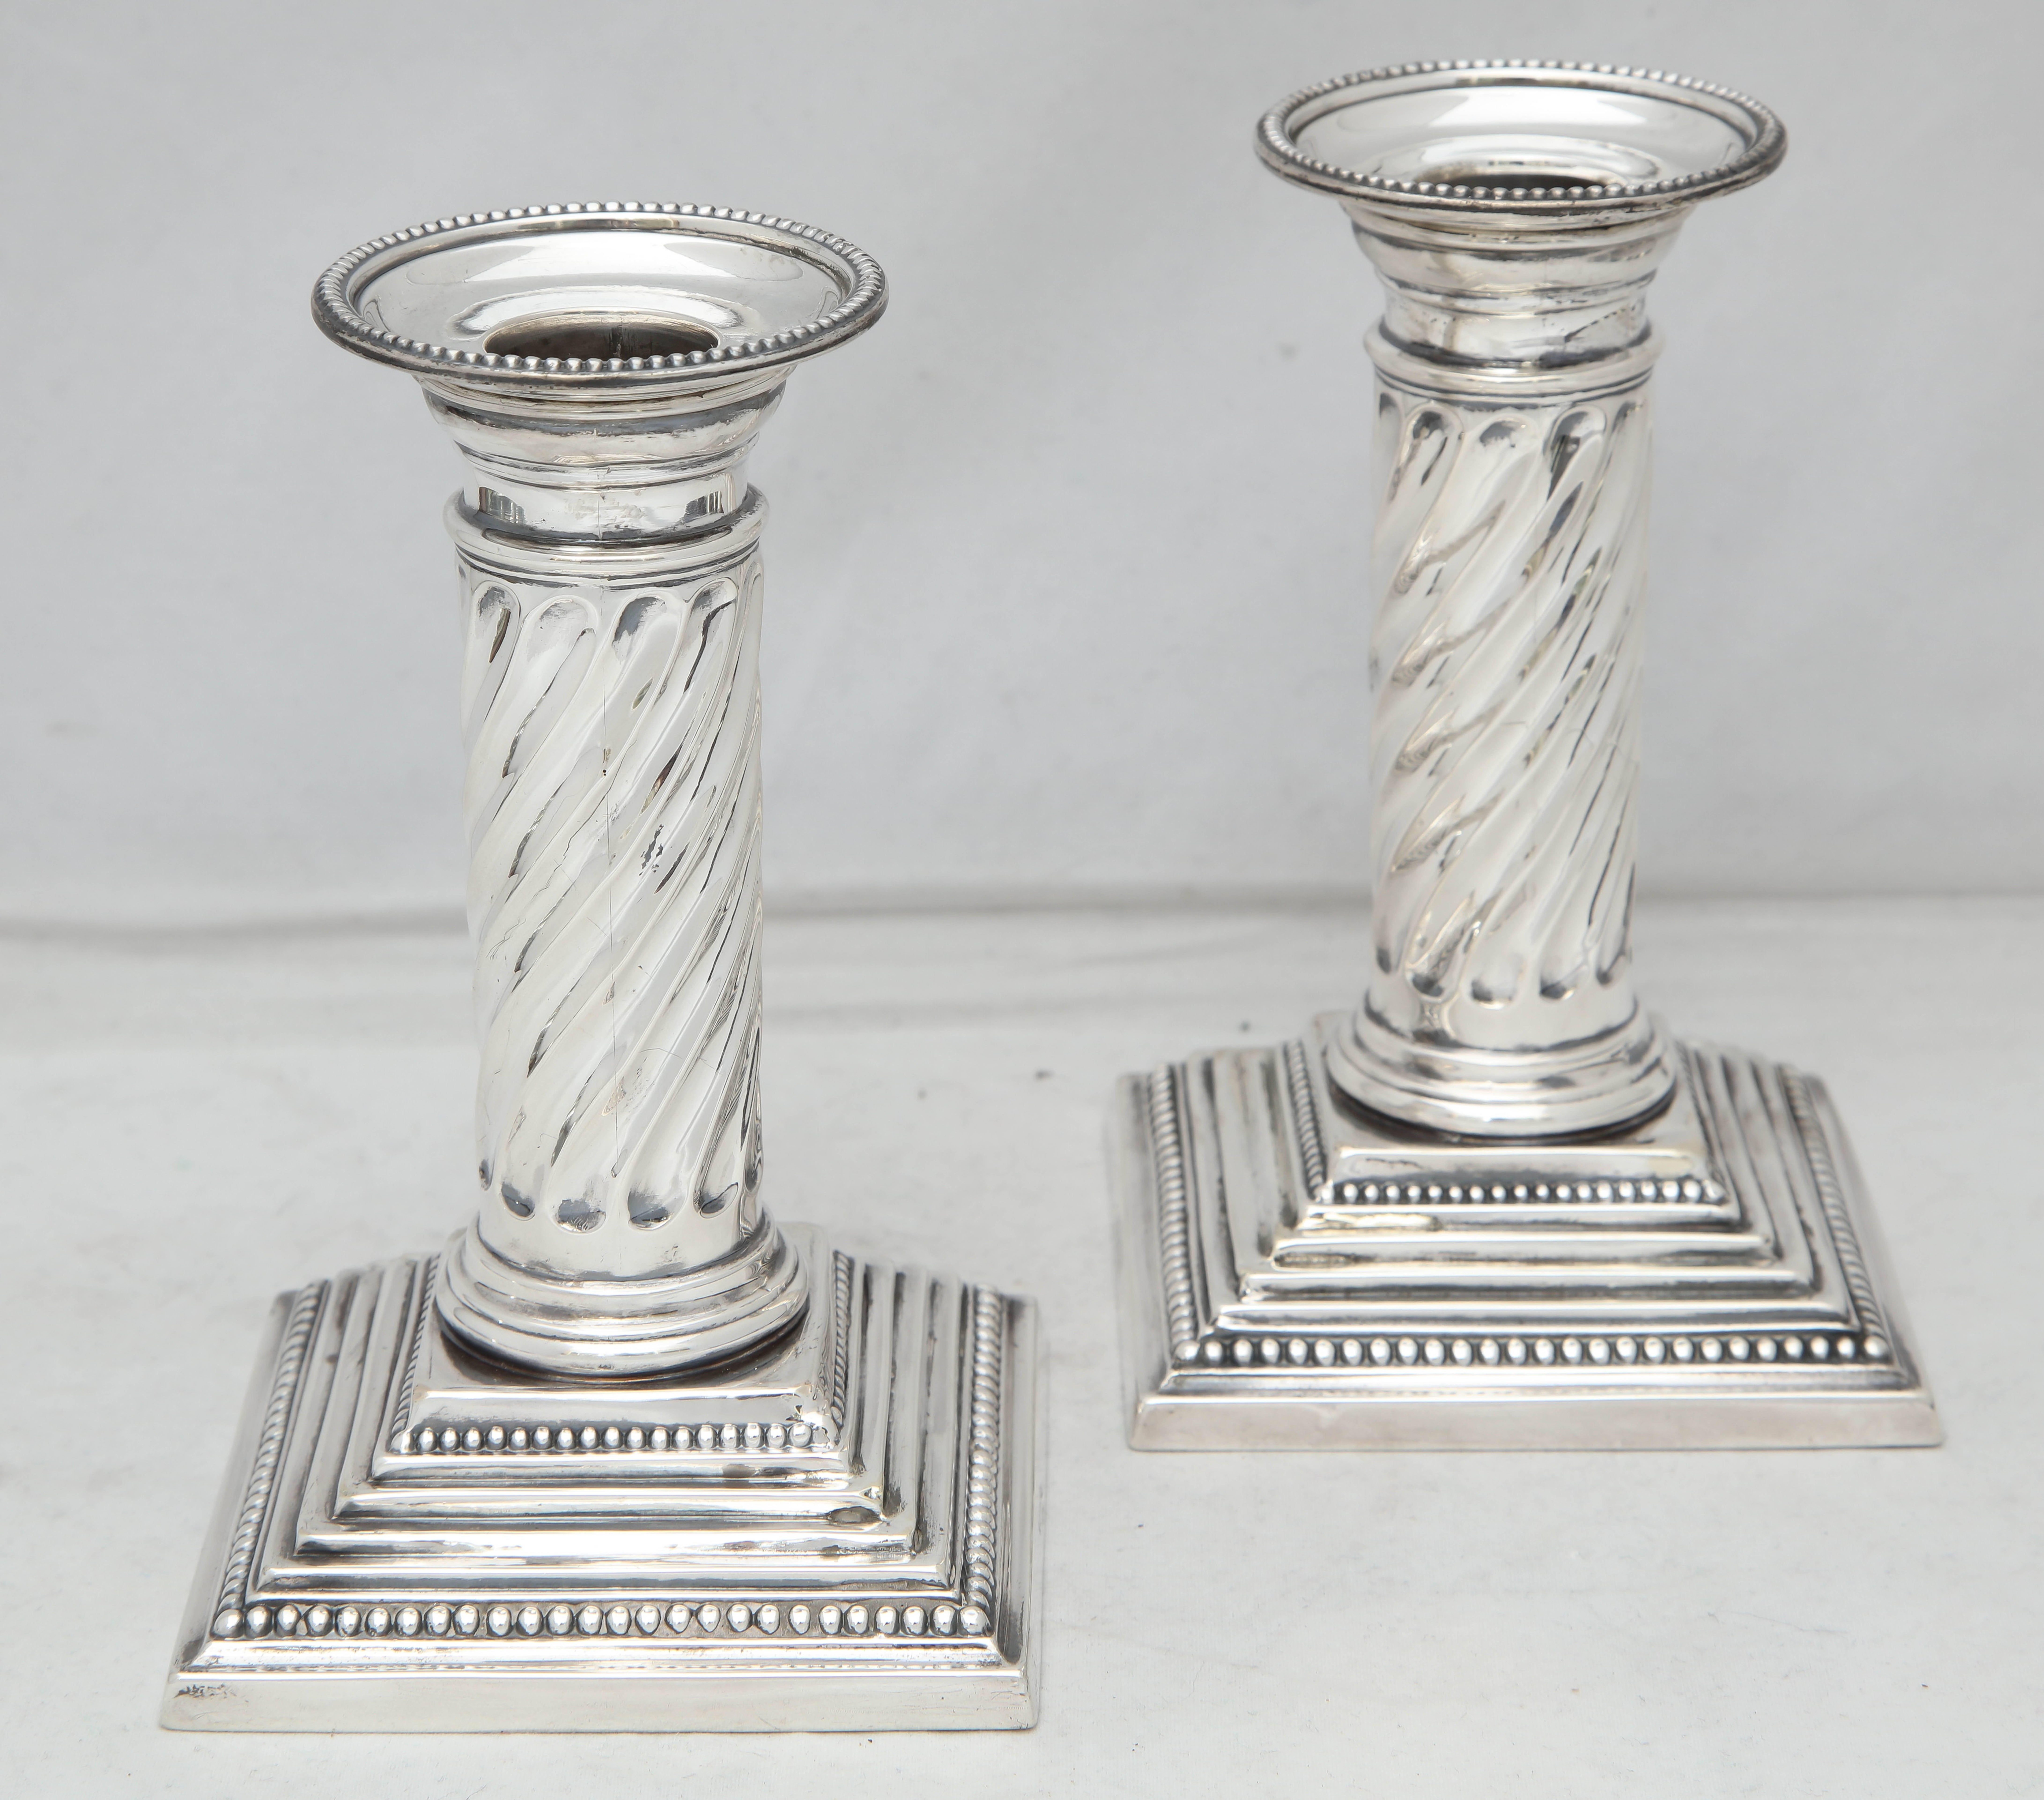 Beautiful pair of Edwardian, Neoclassical, sterling silver, column-form candlesticks with stepped-up bases, Sheffield, England, 1908, Mappin & Webb-makers. Each column is spiral in design. Bases have beading, and beaded motif is picked up on the